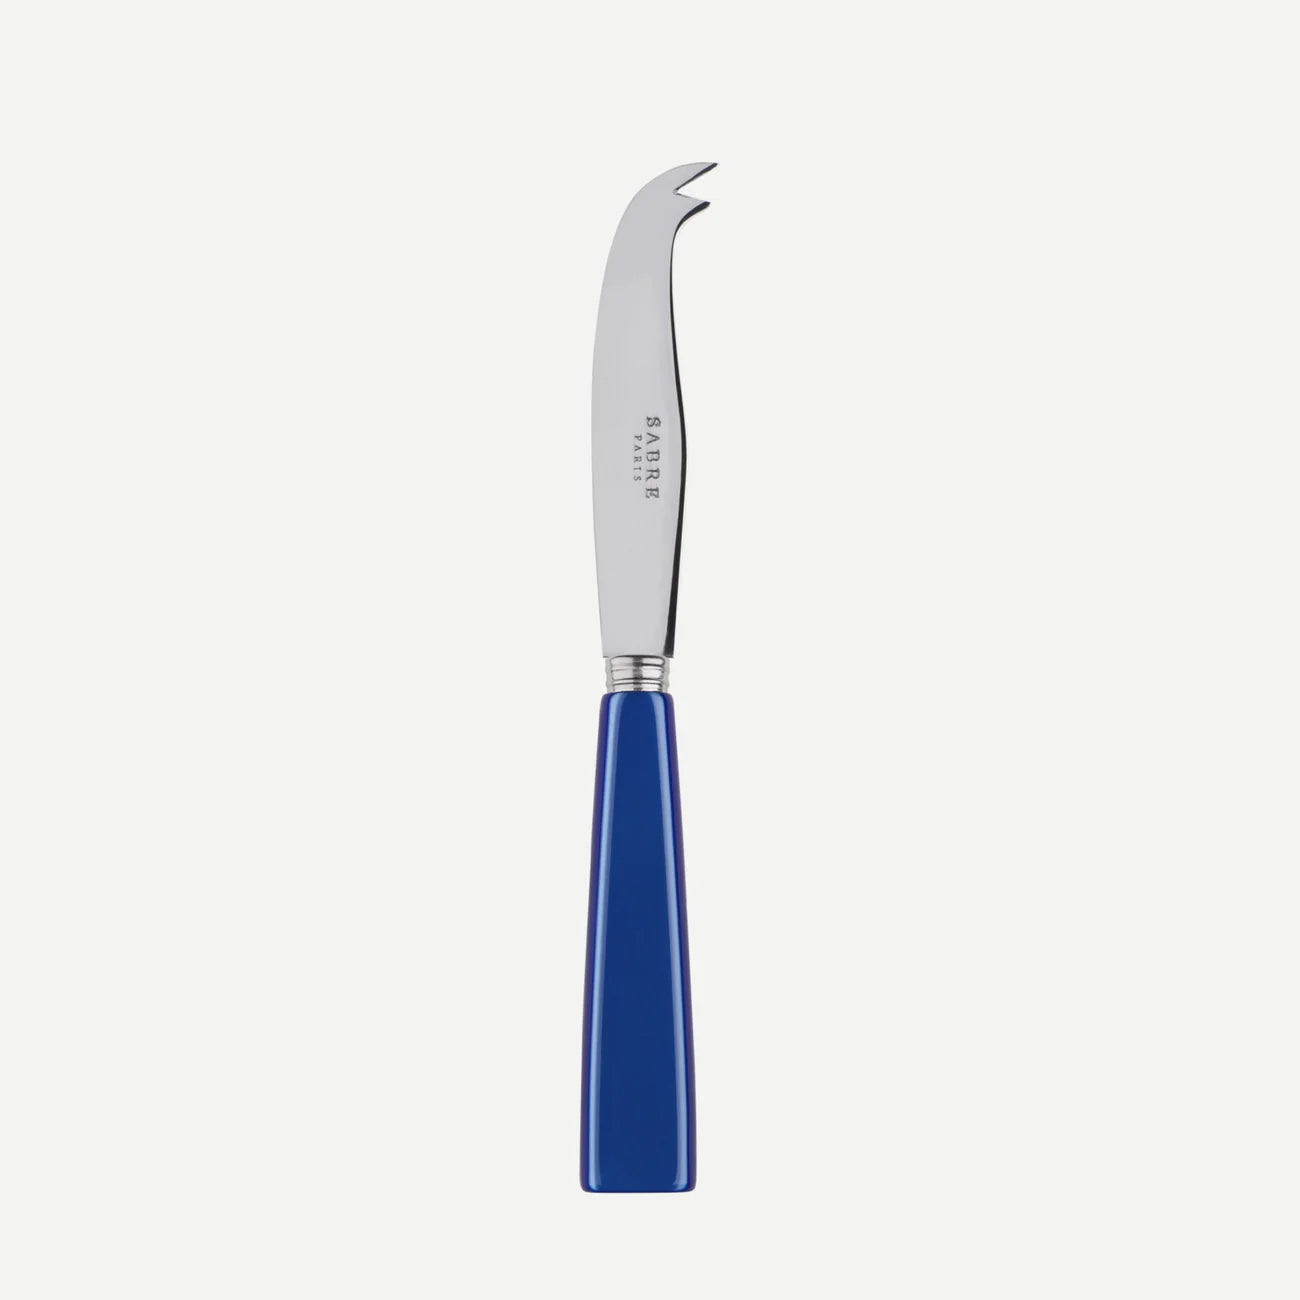 A small sabre paris cheese knife with a bright lapis blue handle. 